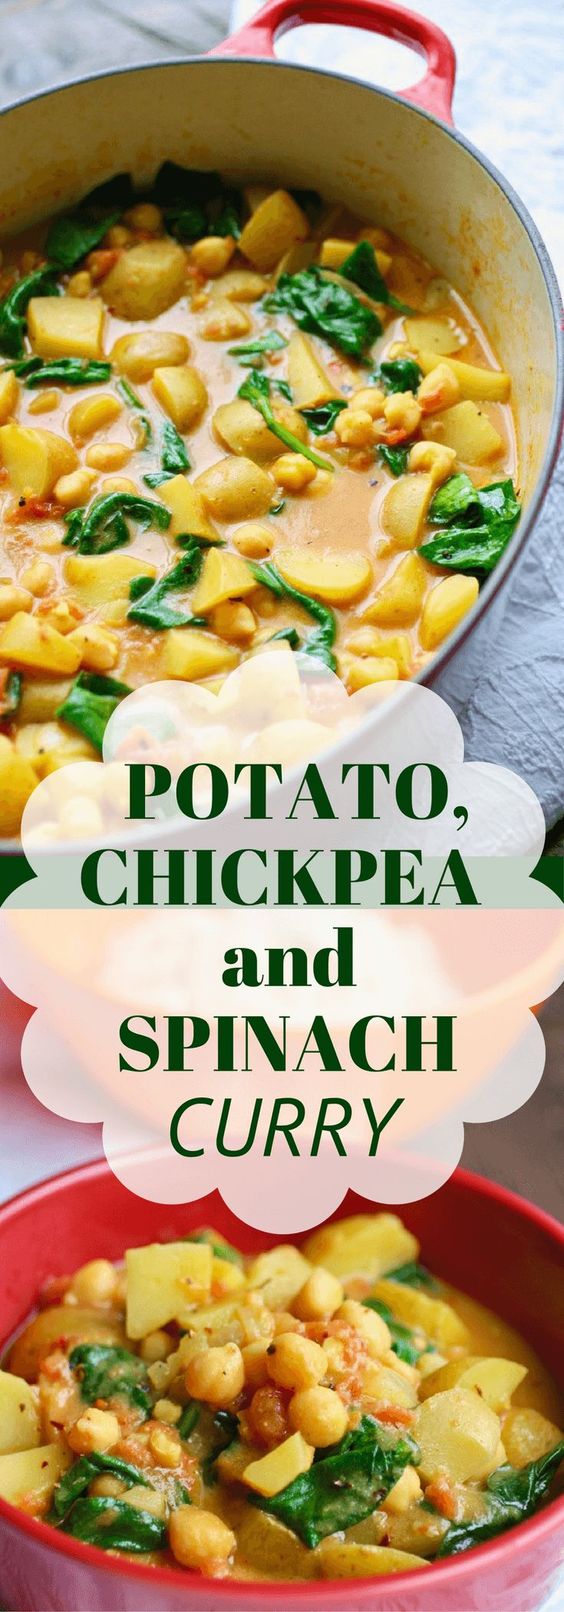 Potato, Chickpea, and Spinach Curry is a delight! It's filling and big on flavor! This is a vegetarian and vegan recipe, too